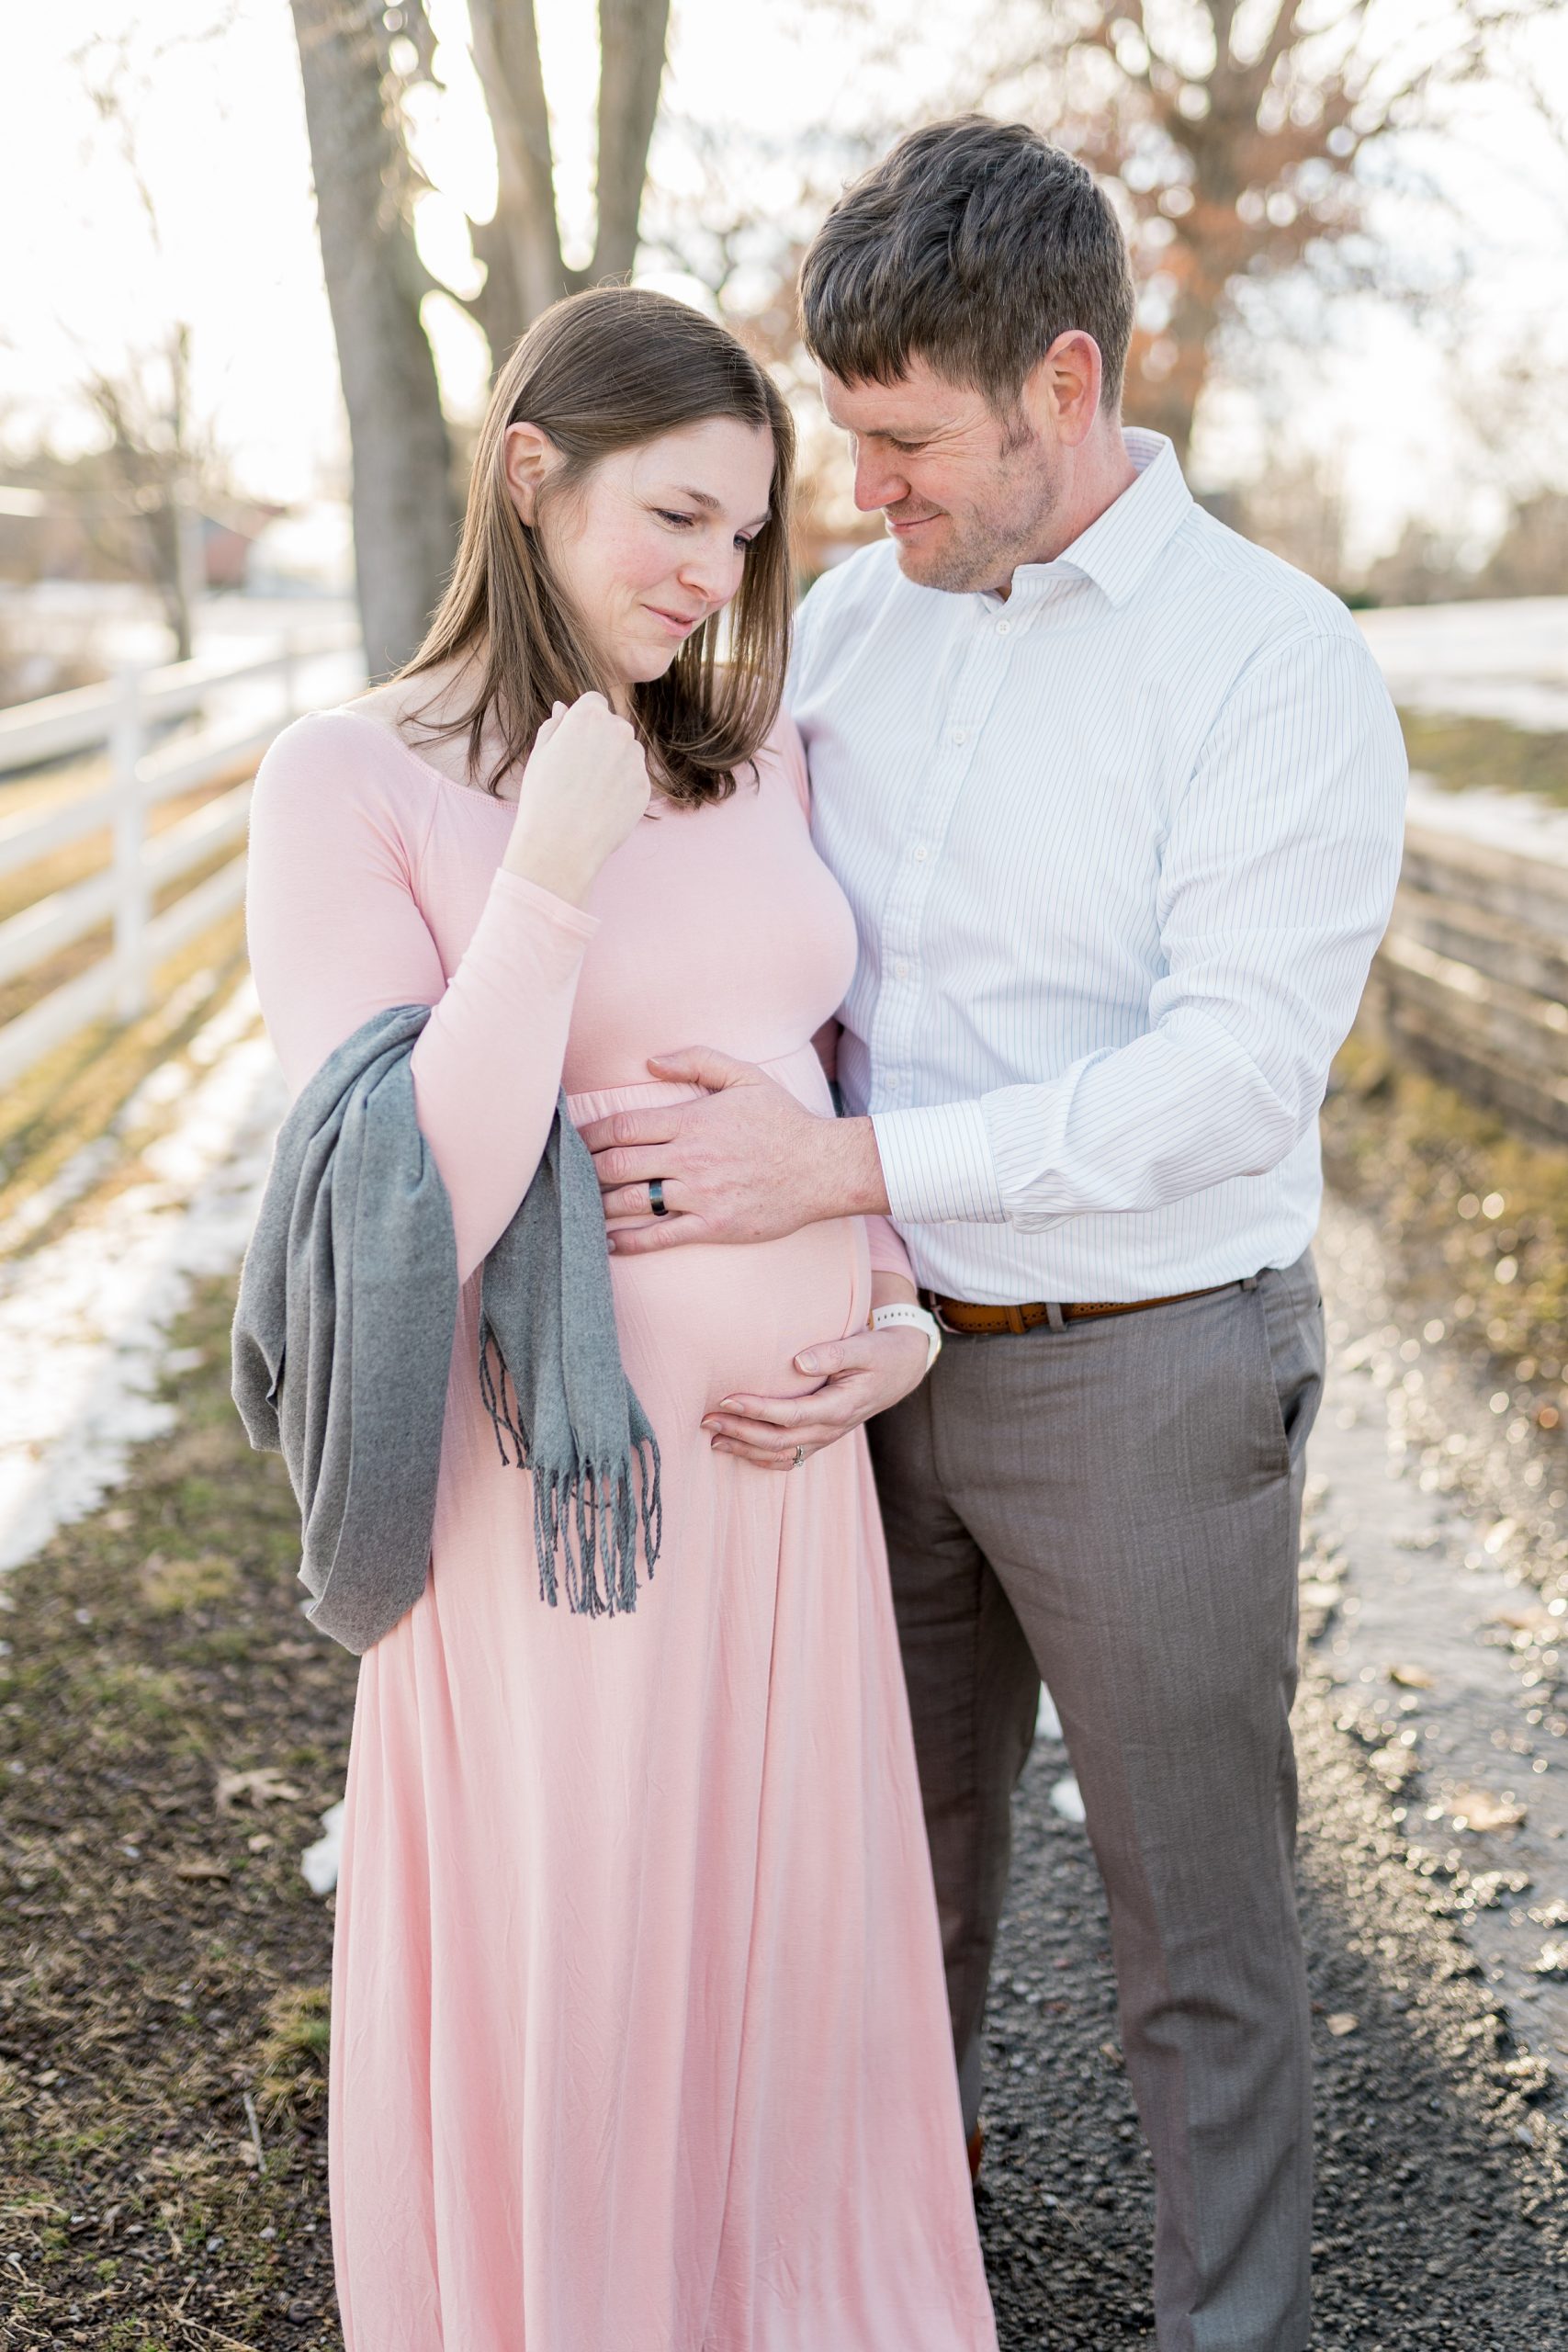 dad touches mom's belly during TN maternity photos in the snow